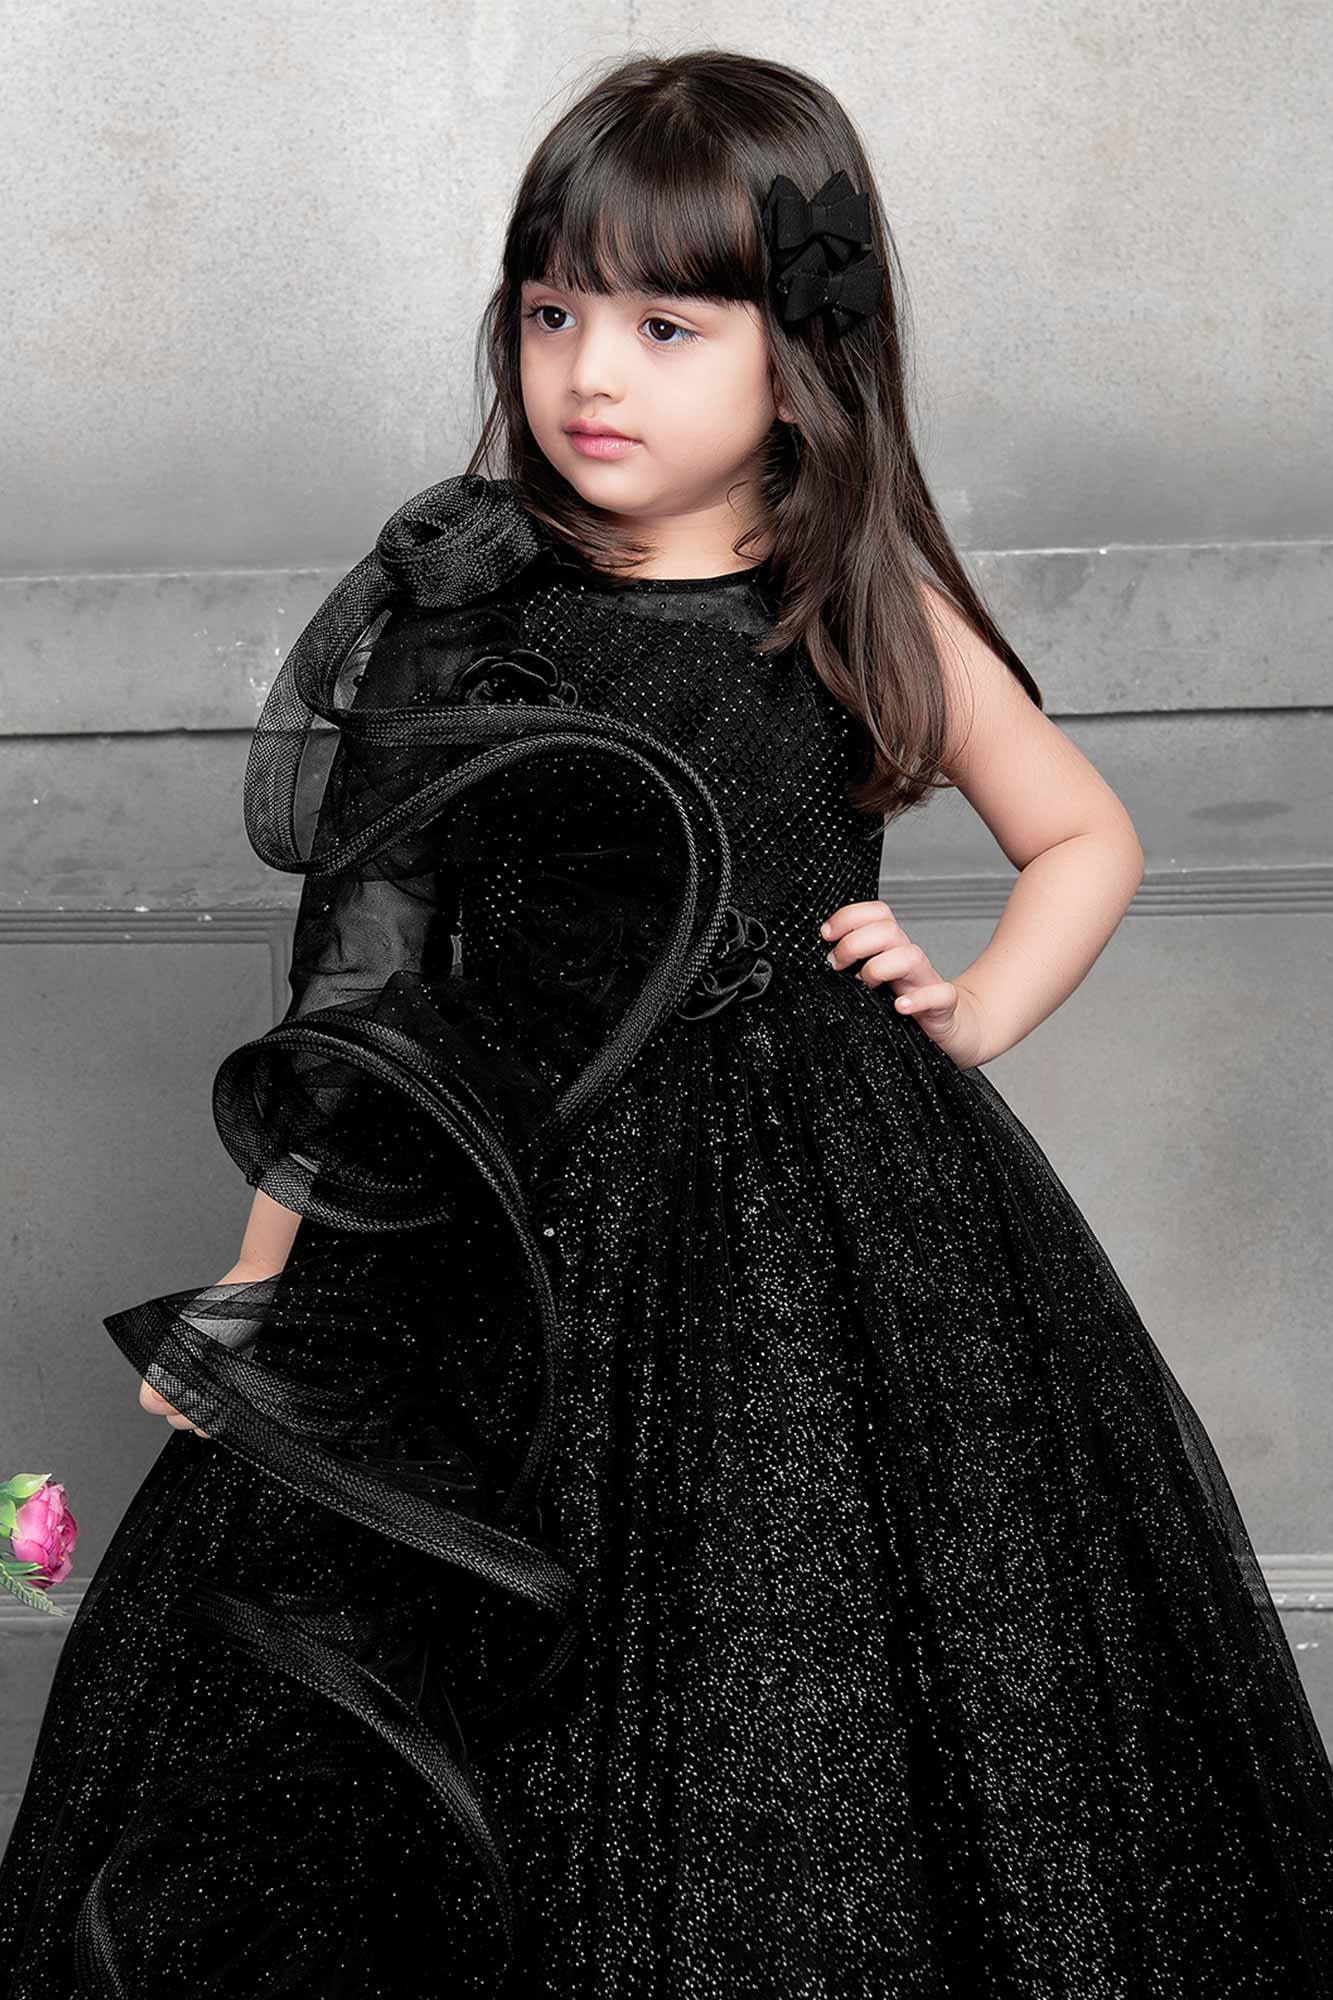 Black Princess Party Gown: A Royal Look for Girls. - Lagorii Kids